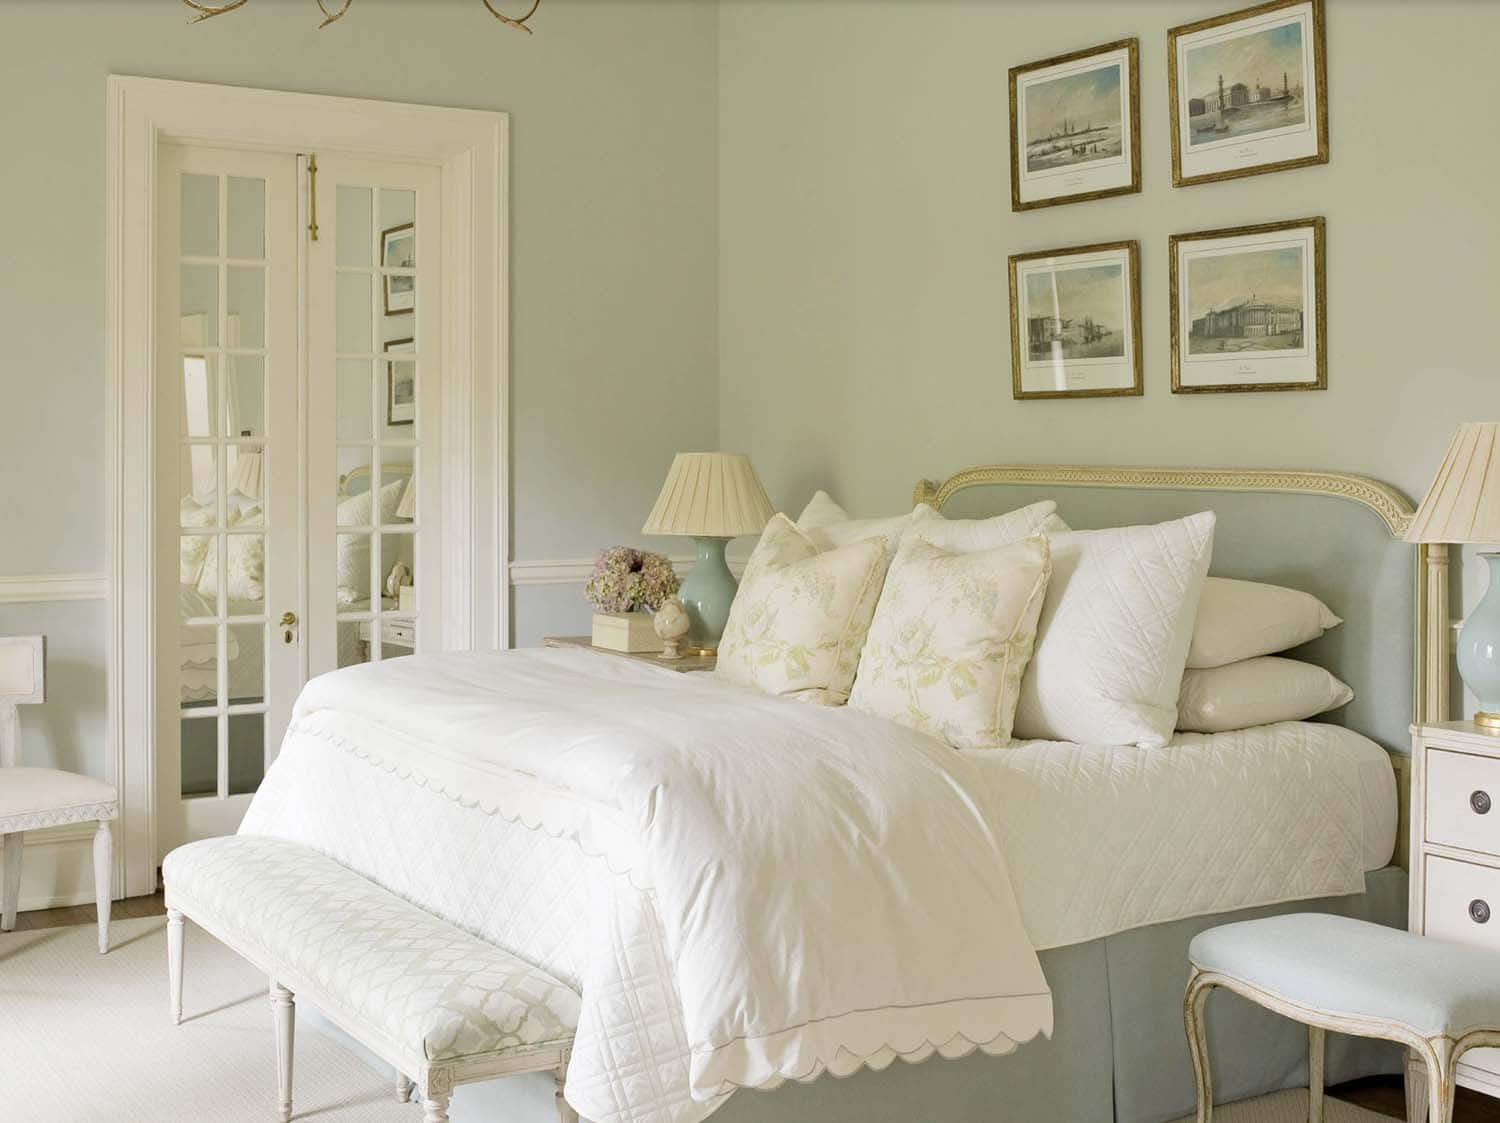 traditional style guest bedroom with a serene color palette